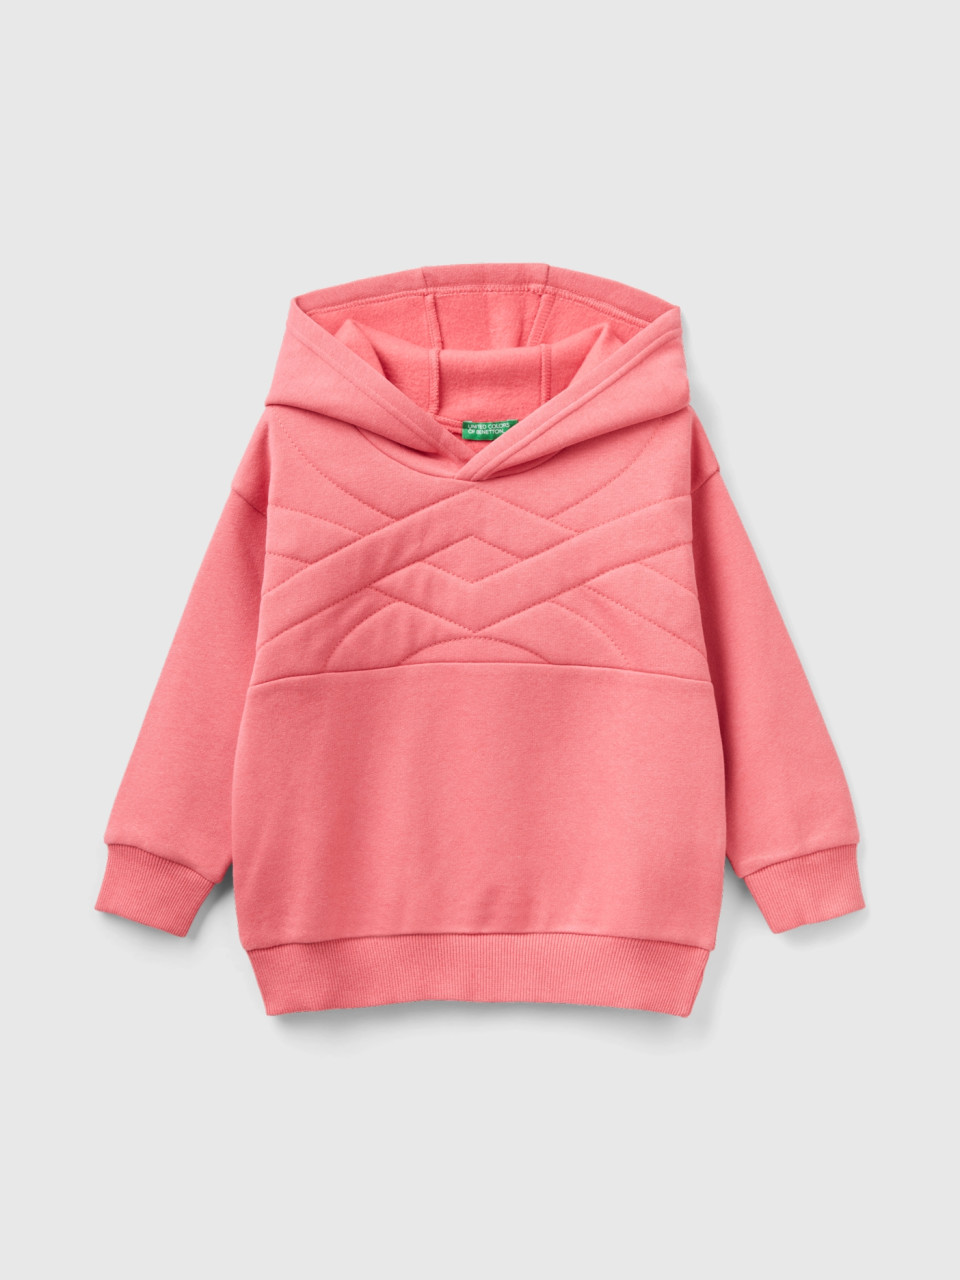 Benetton, Hoodie In Recycled Fabric, Pink, Kids